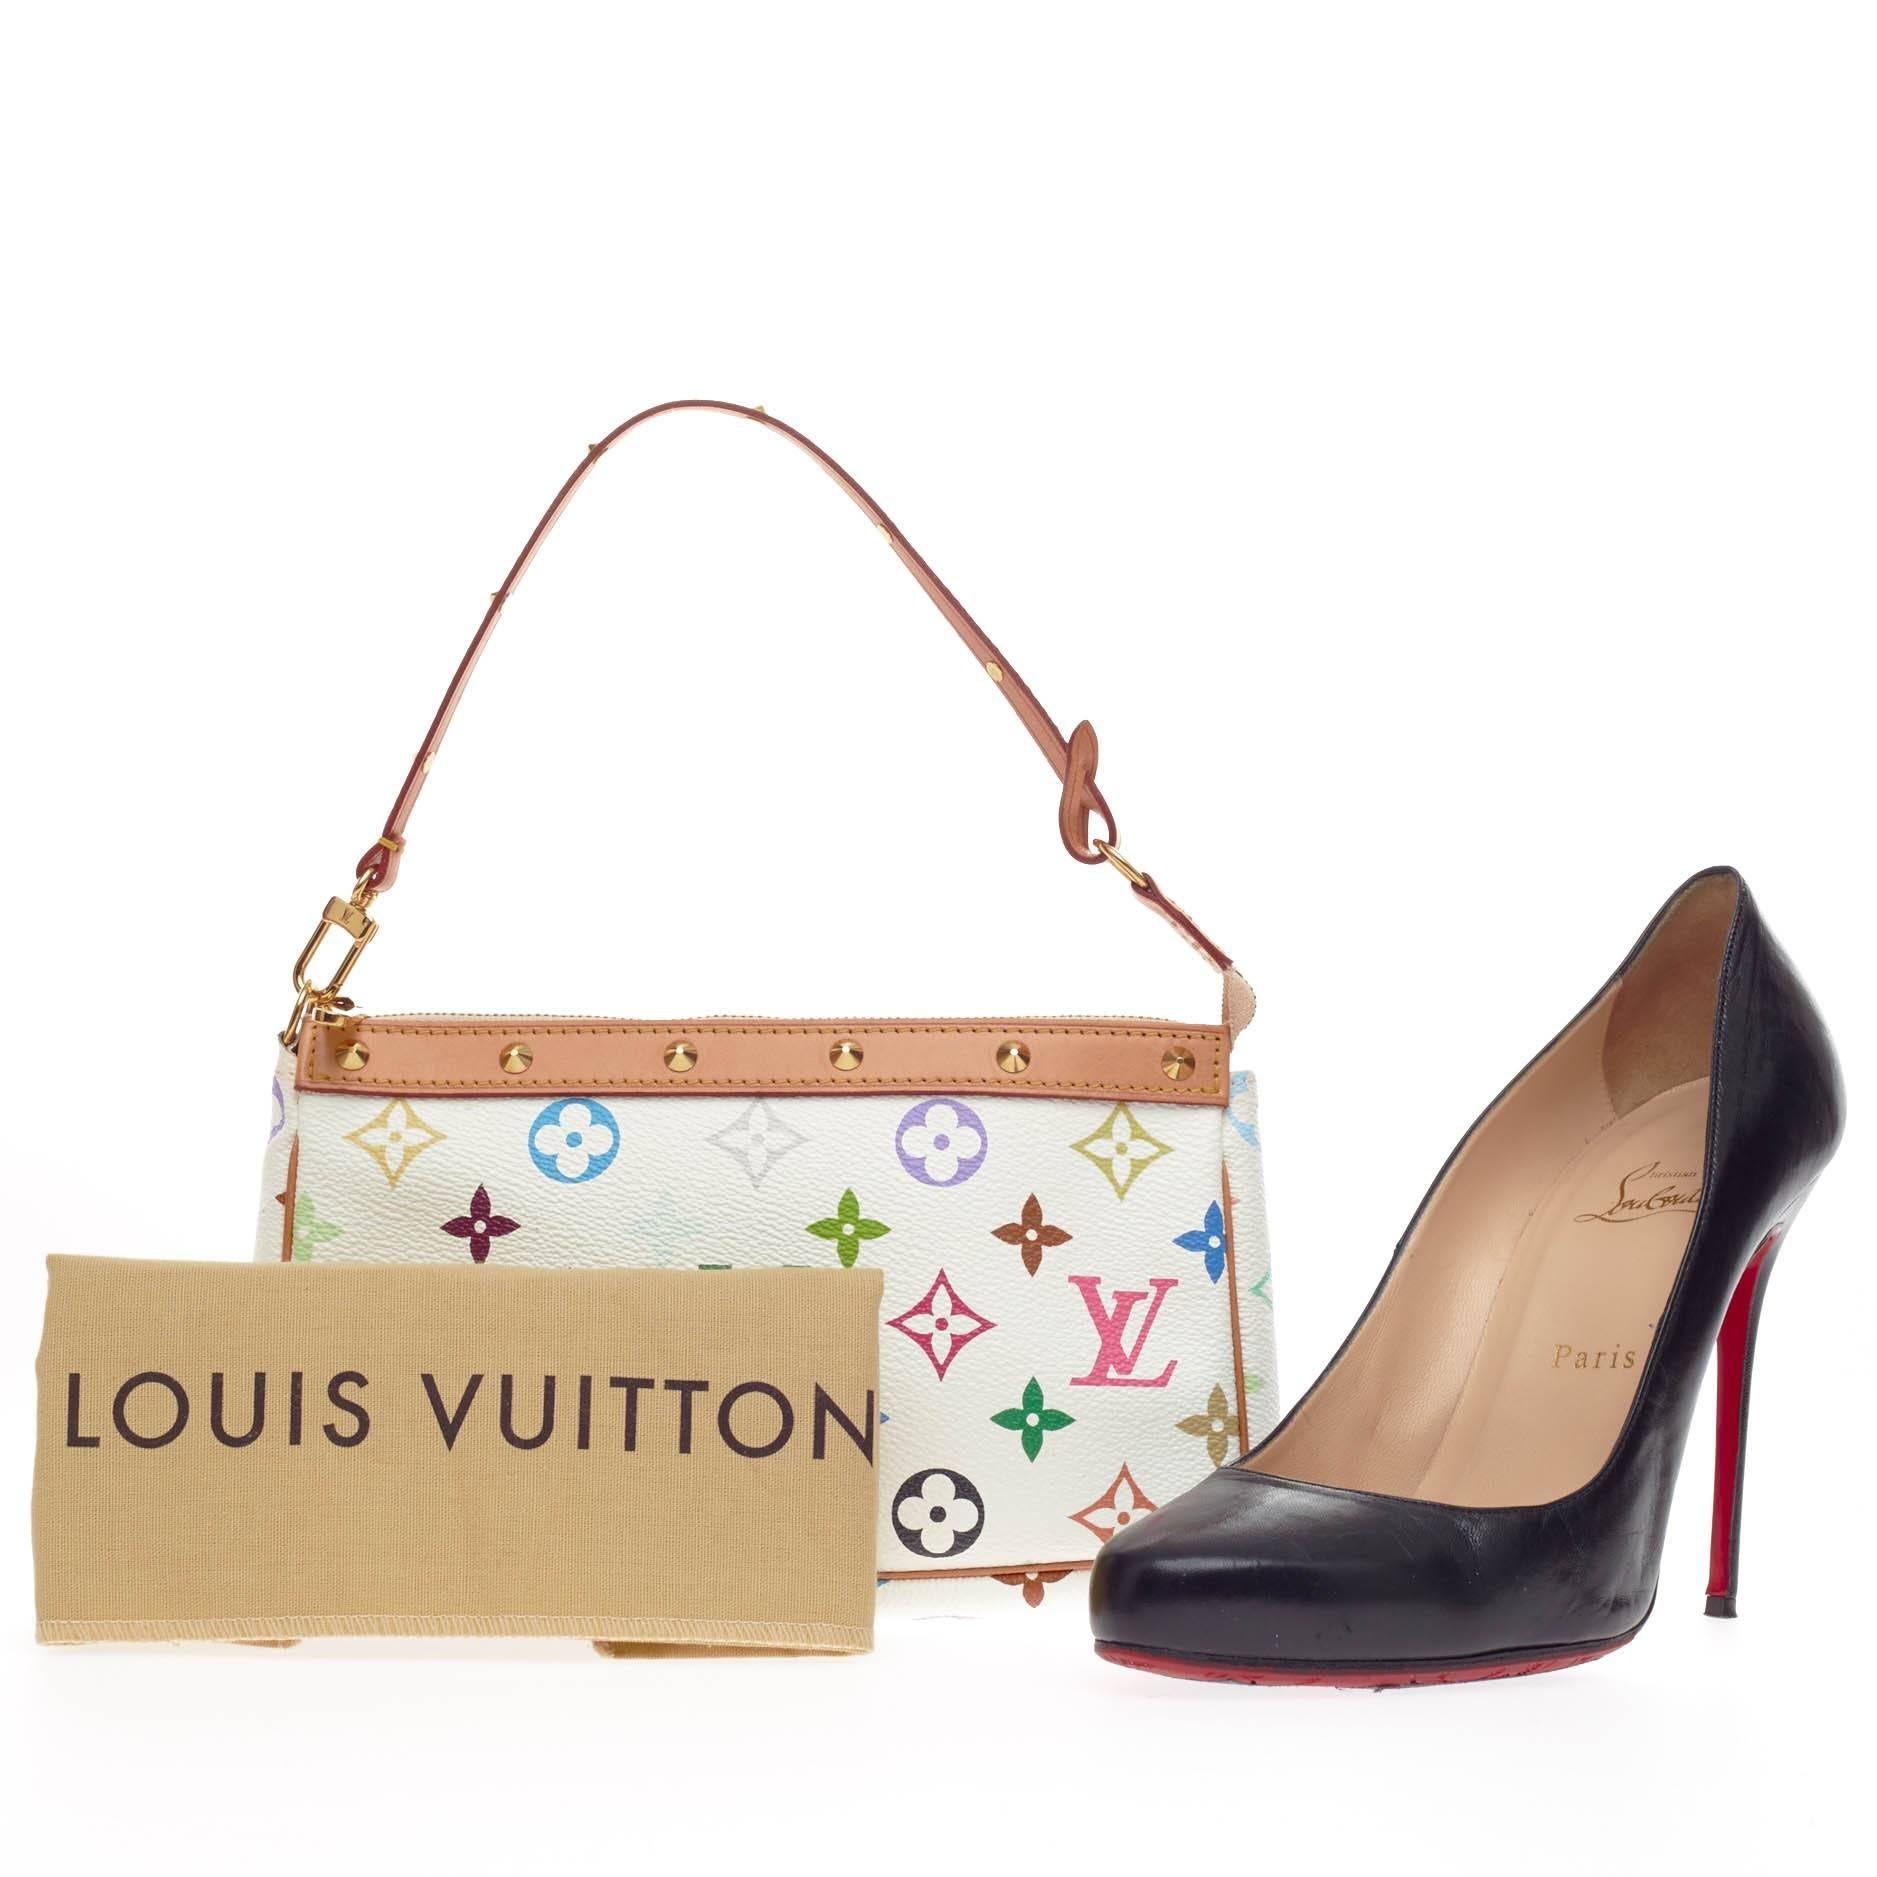 This authentic Louis Vuitton Pochette Accessories Monogram Multicolor is designed in collaboration with Marc Jacobs and Japanese artist Takashi Murakami. This popular, white multicolor monogram canvas pochette features a single loop shoulder strap,